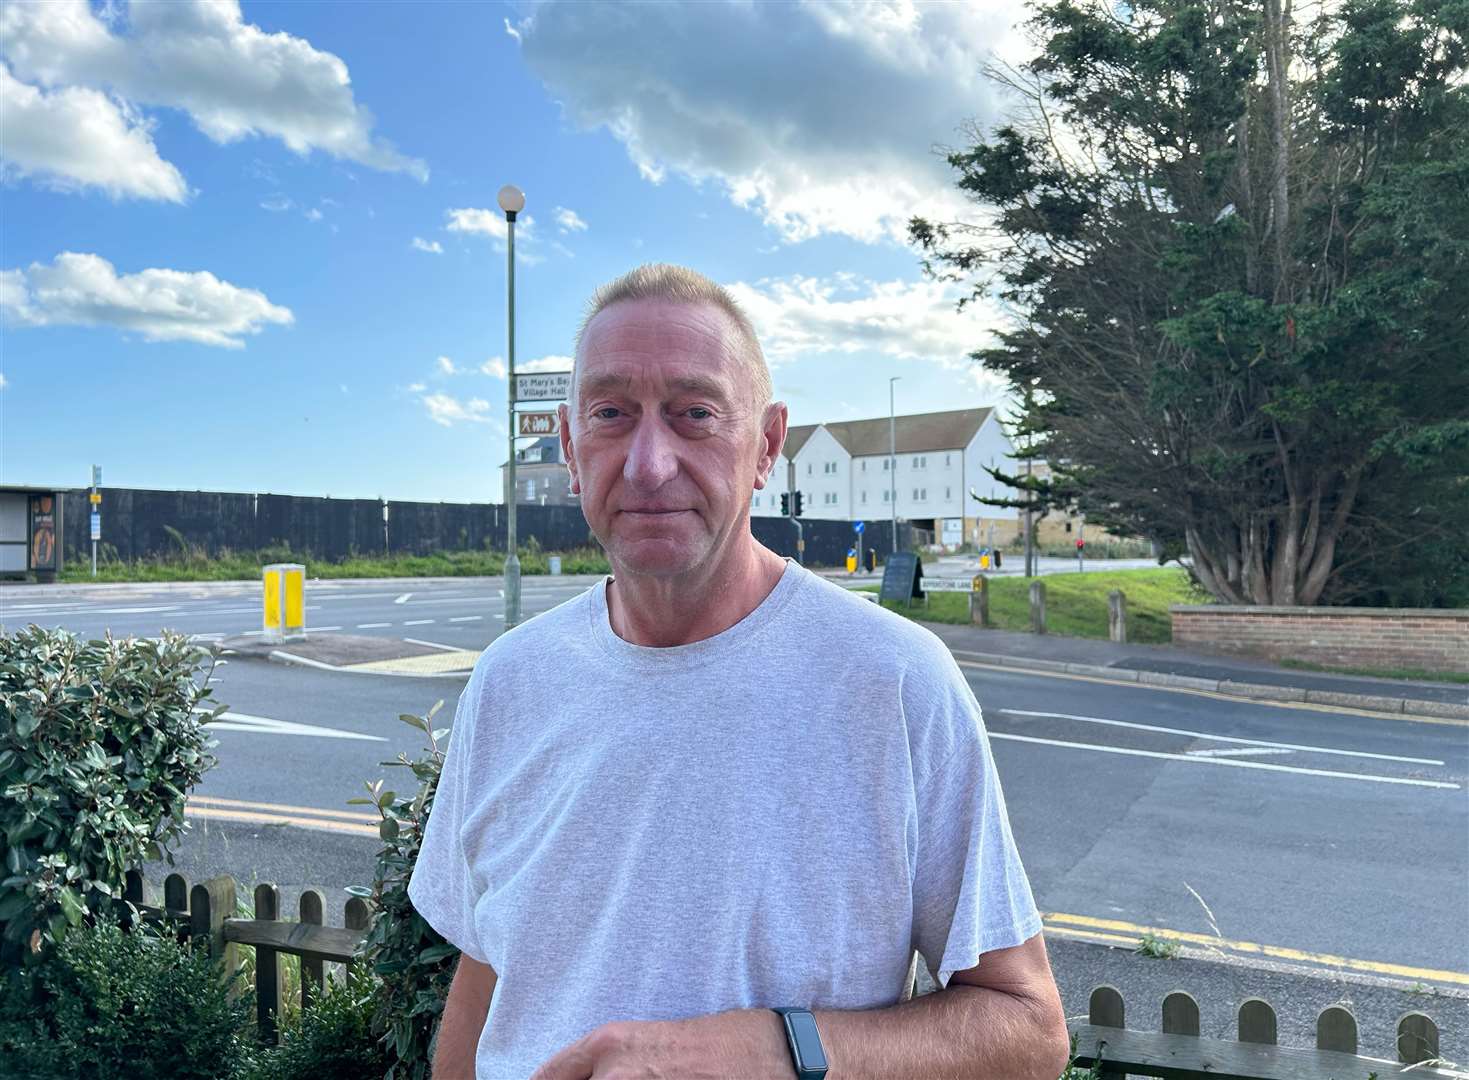 Mark Jones lives directly opposite the abandoned homes and previously expressed his concerned about the fly-tipping he has seen